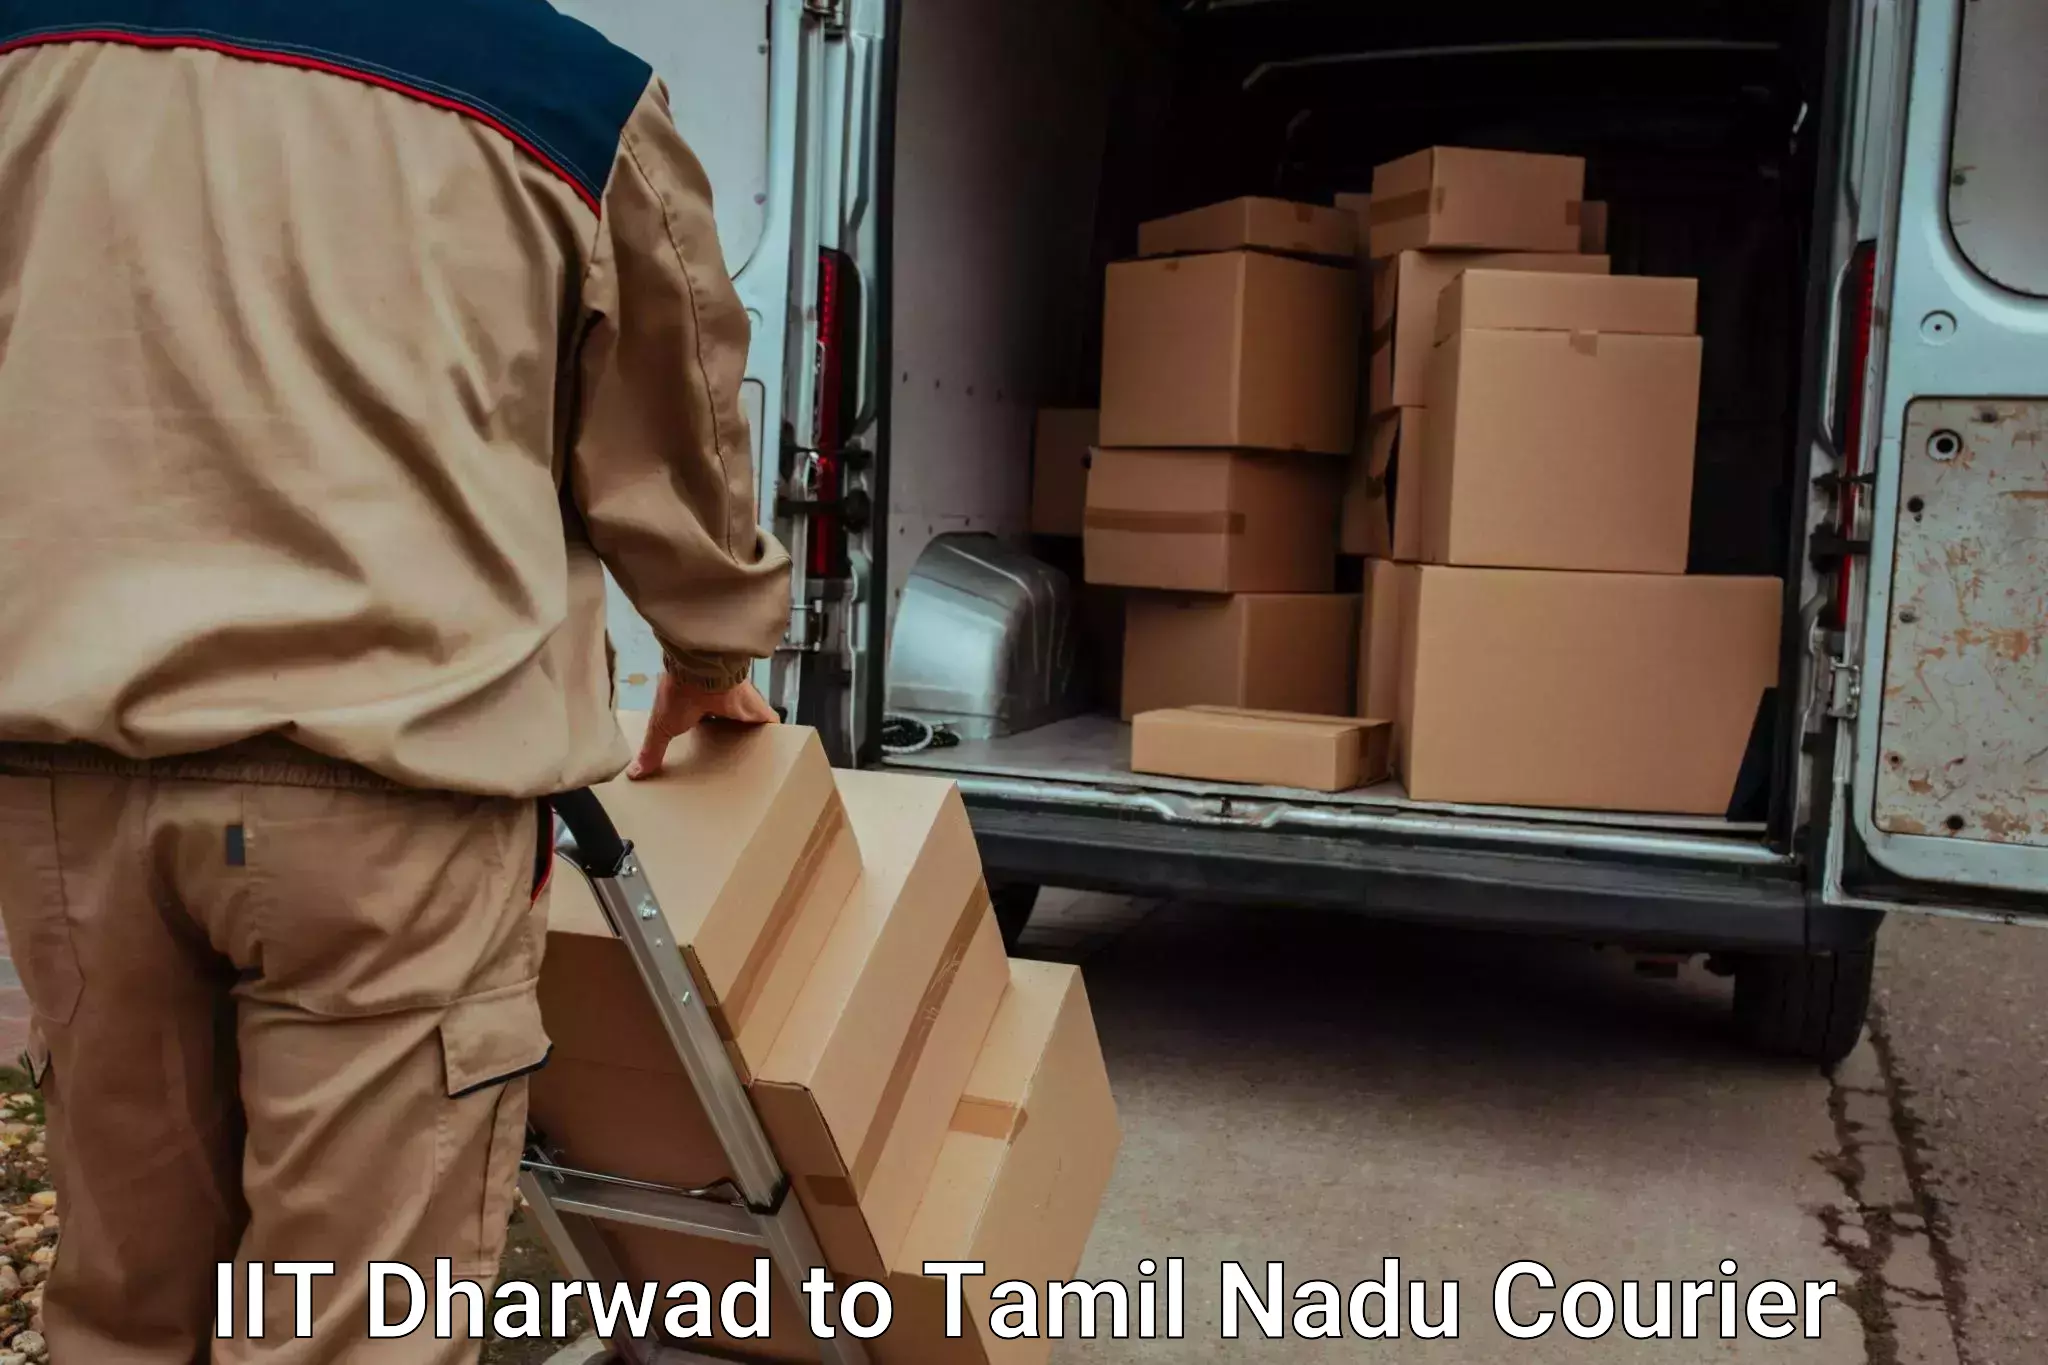 Professional relocation services IIT Dharwad to Chennai